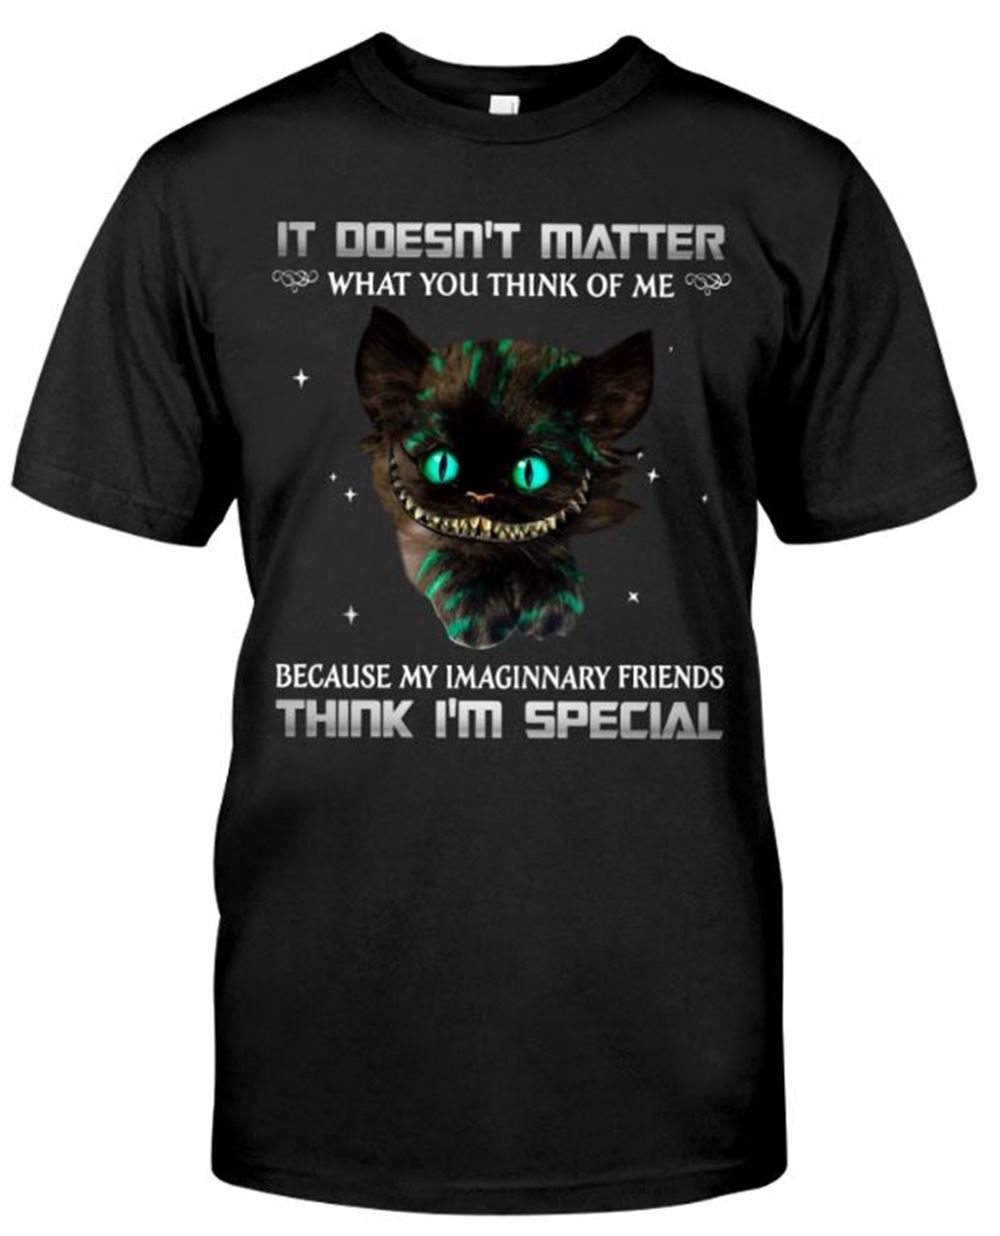 It Doesnt Matter What You Think Of Me Classic T-shirt Unisex Short Sleeve Classic Tee